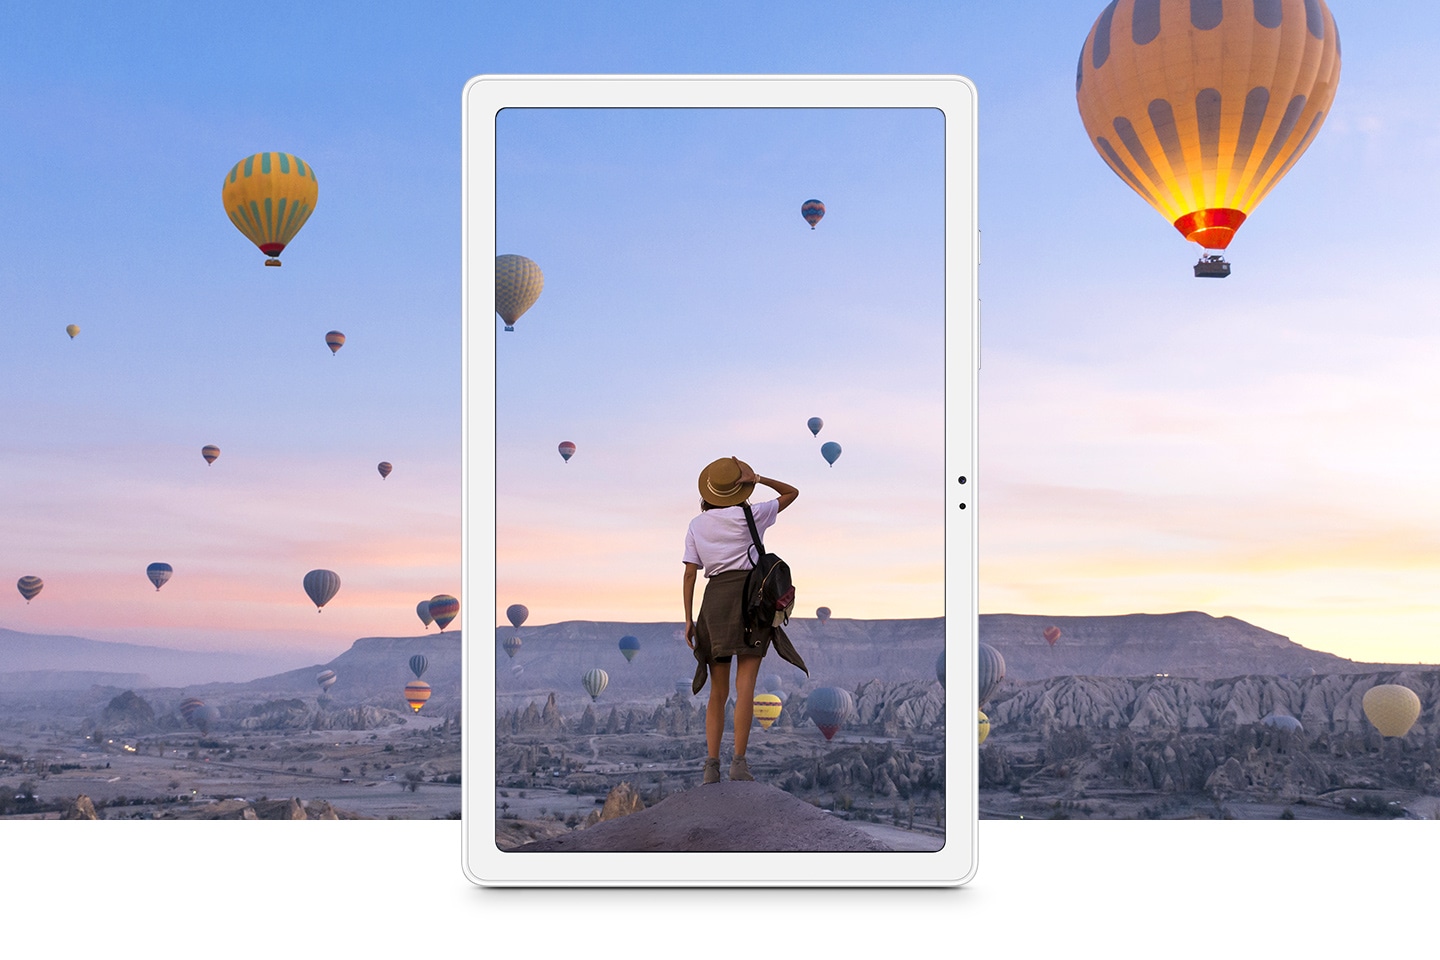 Galaxy Tab A7 depicts a woman overlooking a canyon filled with flying hot air balloons at dawn.